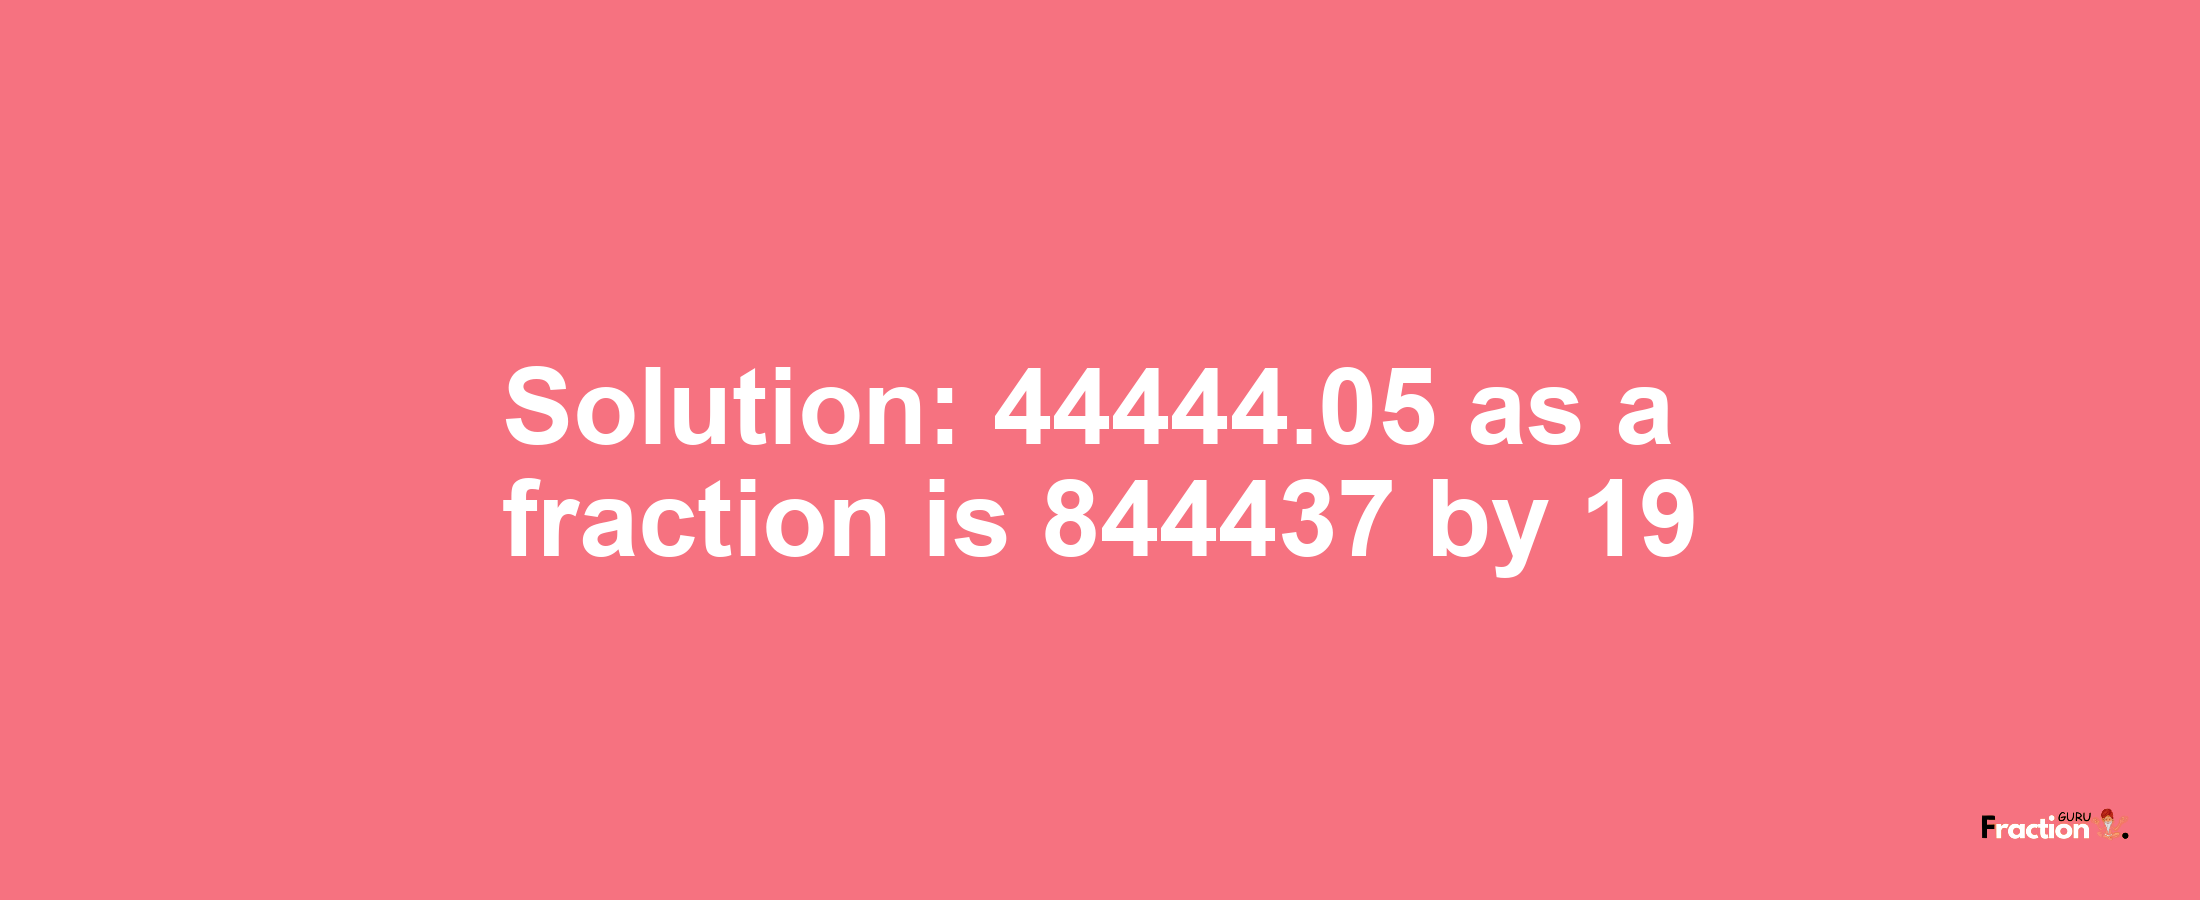 Solution:44444.05 as a fraction is 844437/19